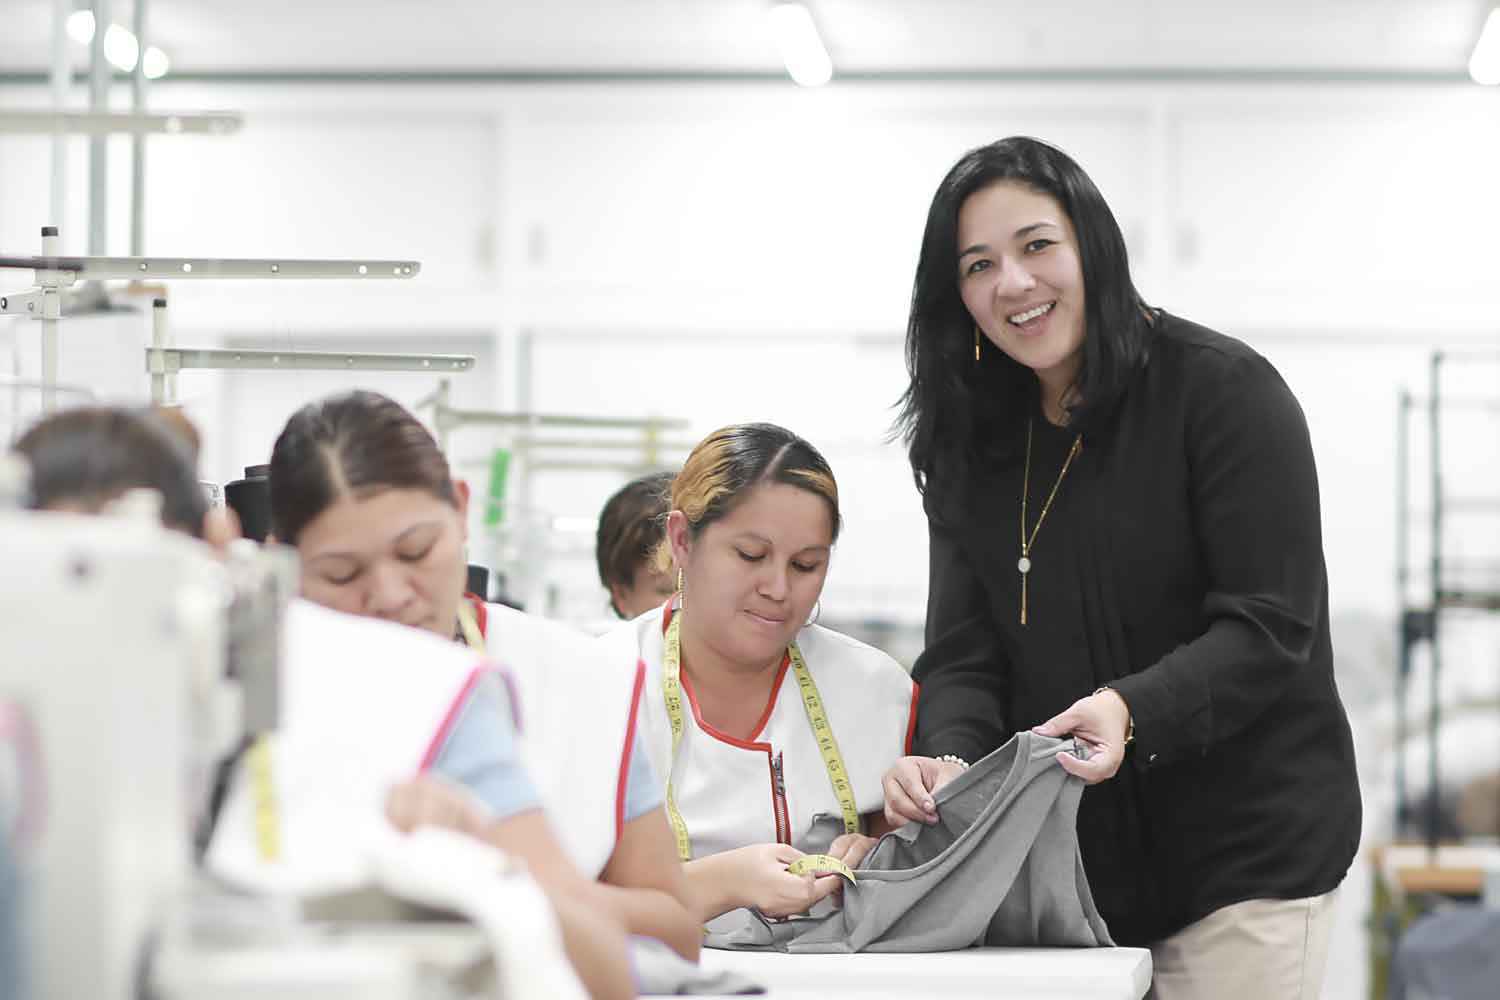 A manager is smiling at the camera while helping a sewing employee.